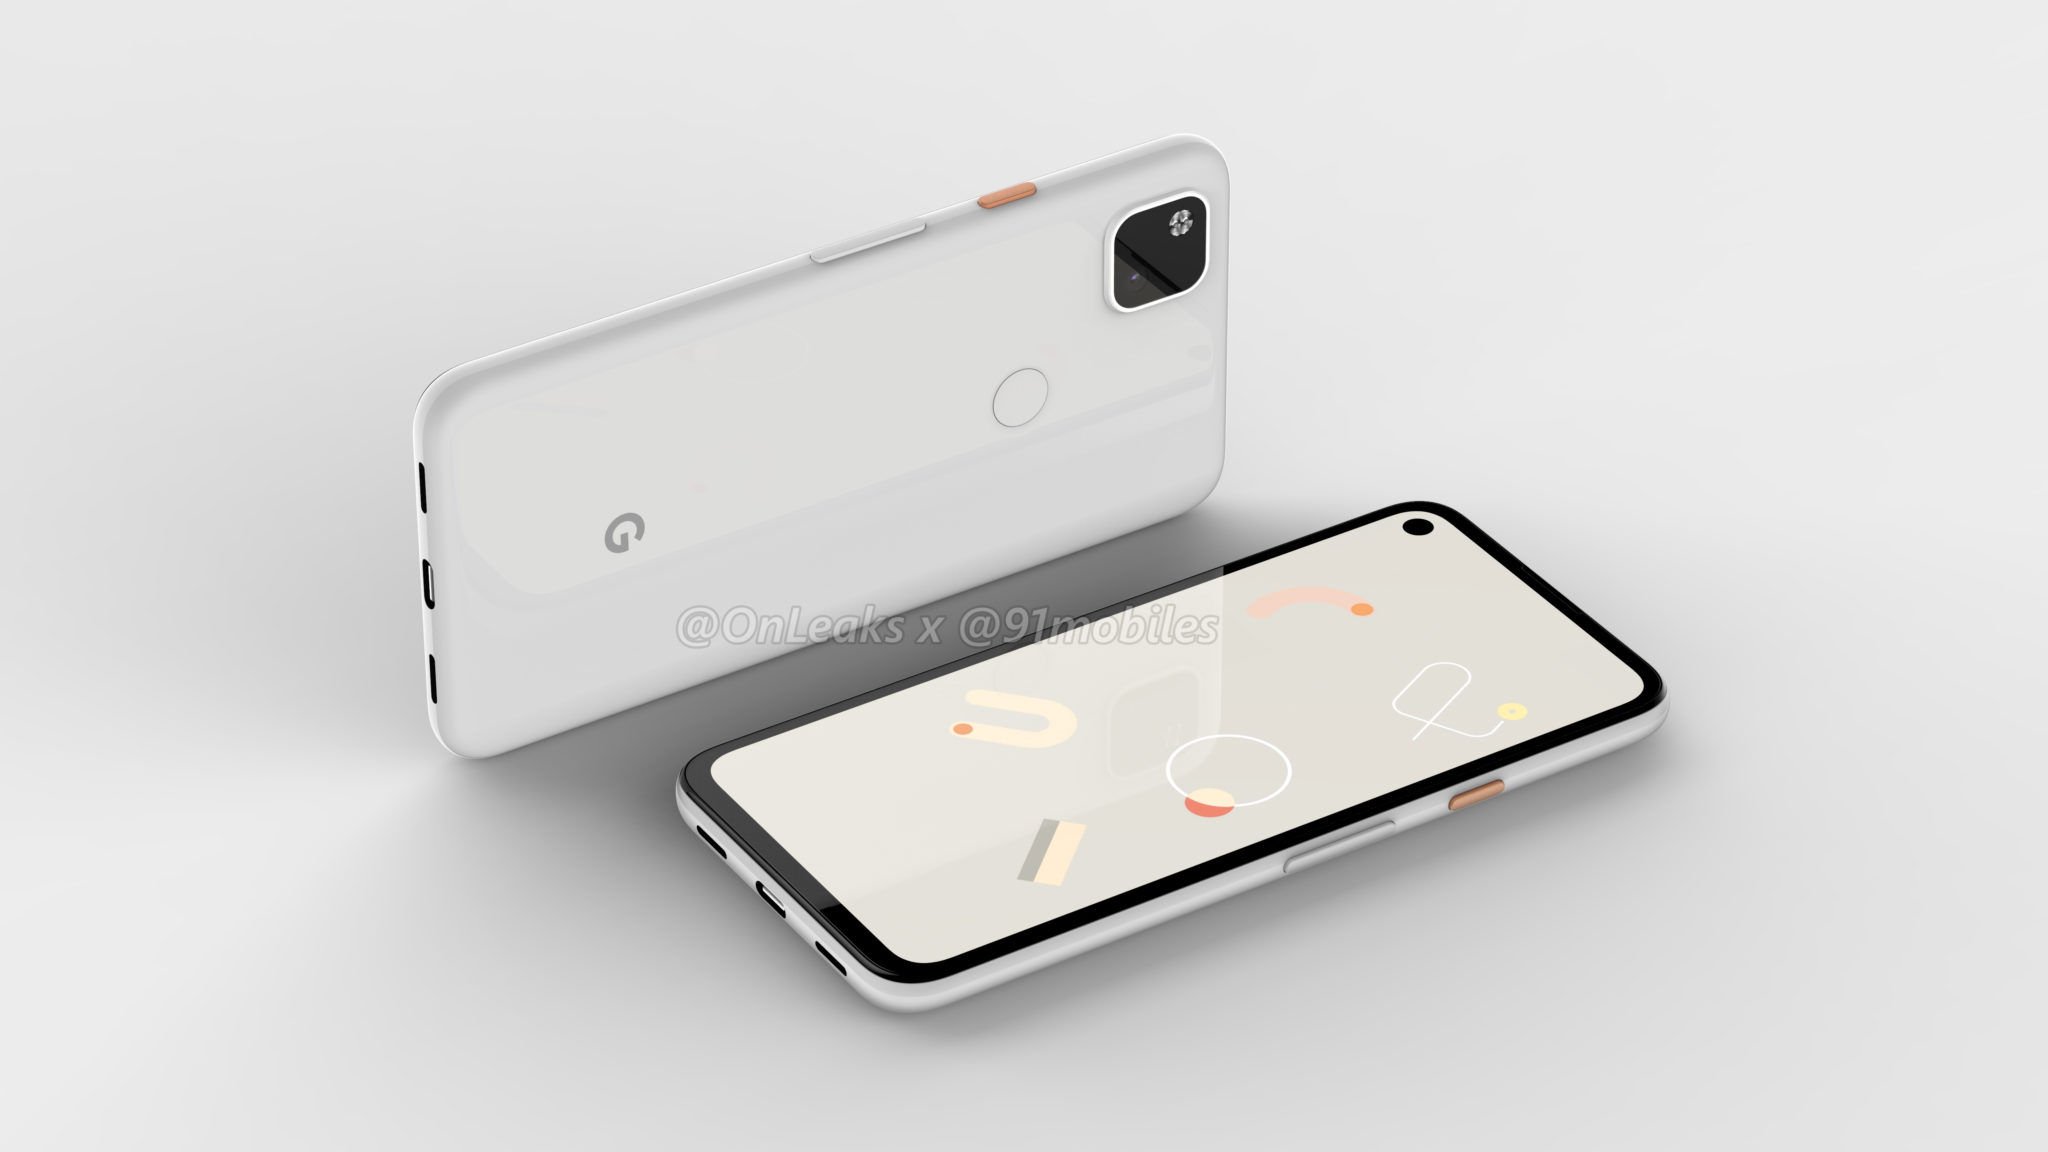 Google Pixel 4a (5G), Pixel 5 are other Pixel phones planned for 2020, claims report